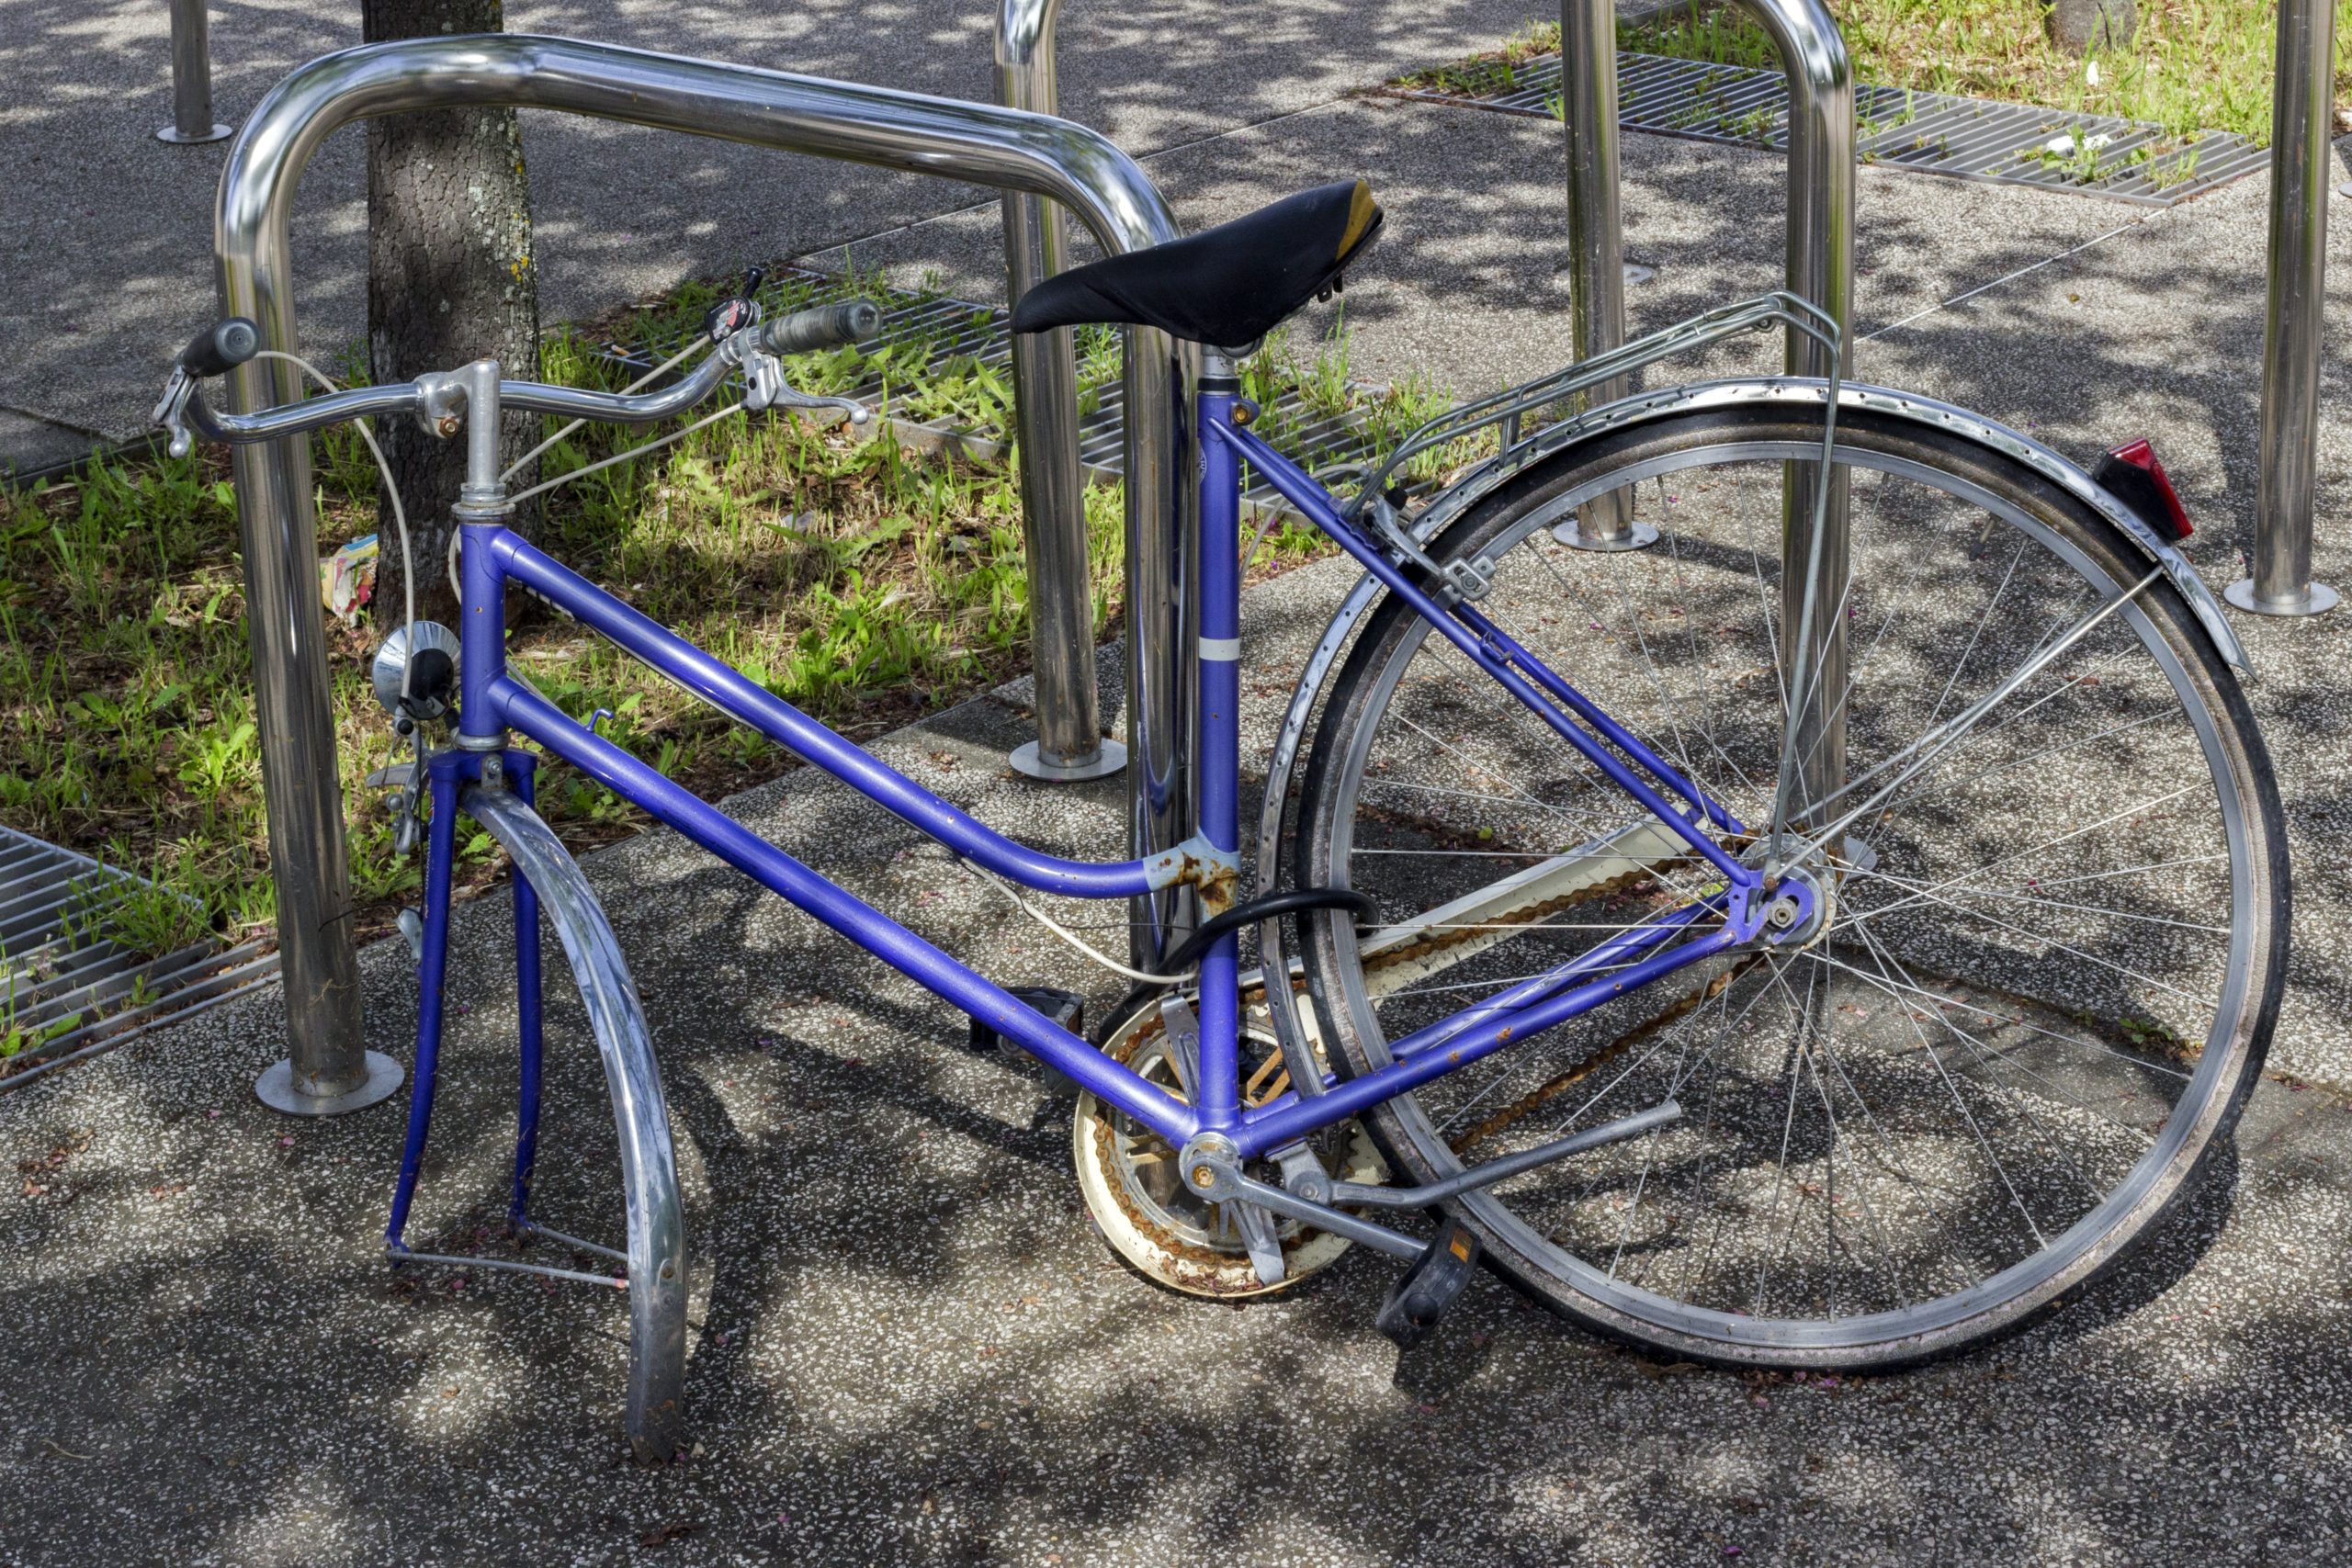 Only 1 in 5 stolen bicycles in Brussels returns to owner